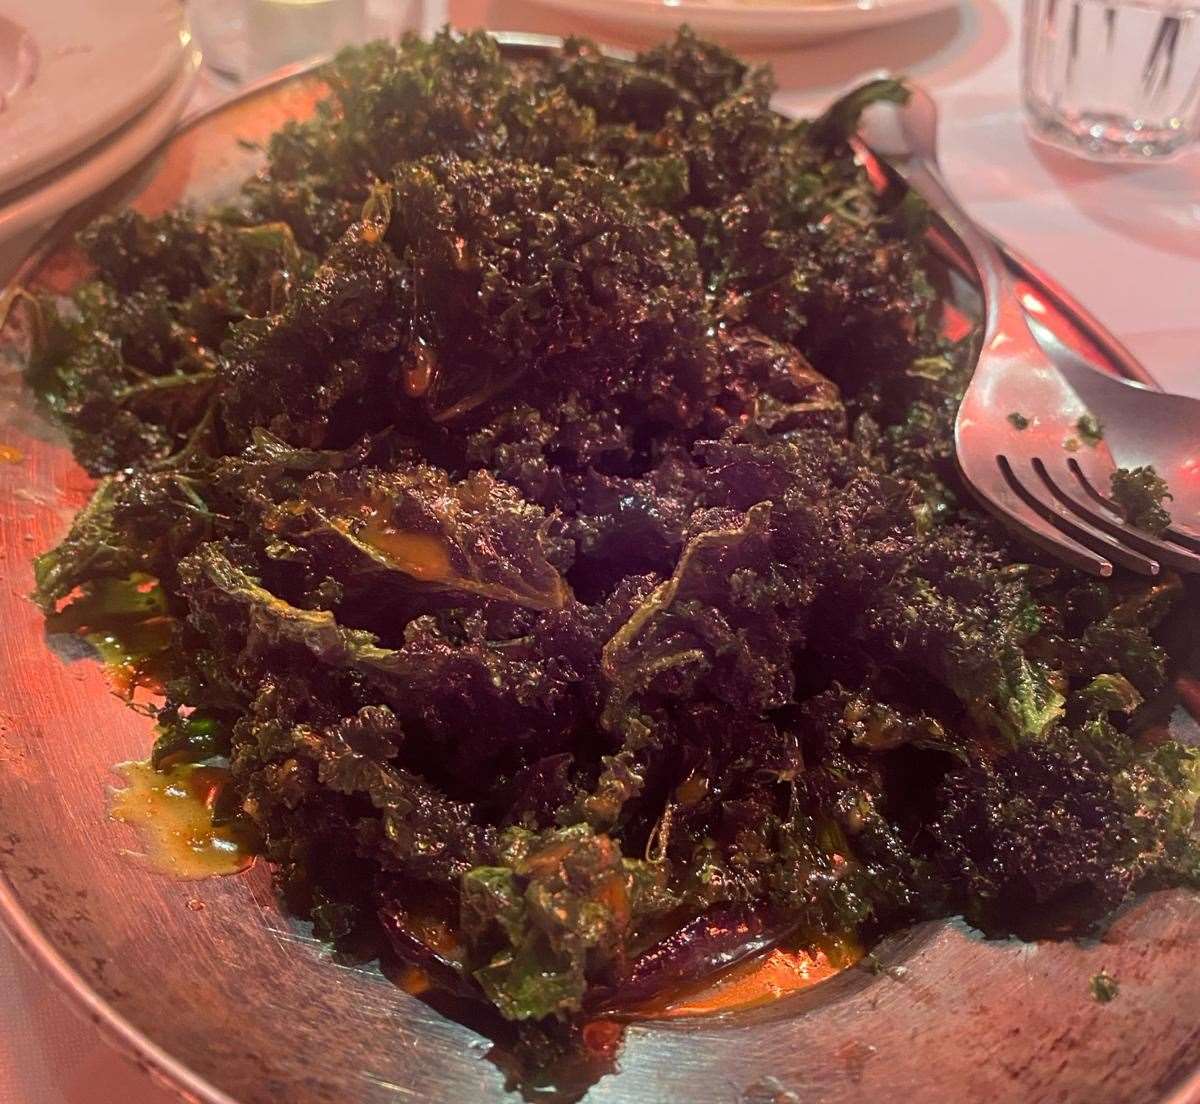 Crispy kale and aubergine salad was an absolute triumph